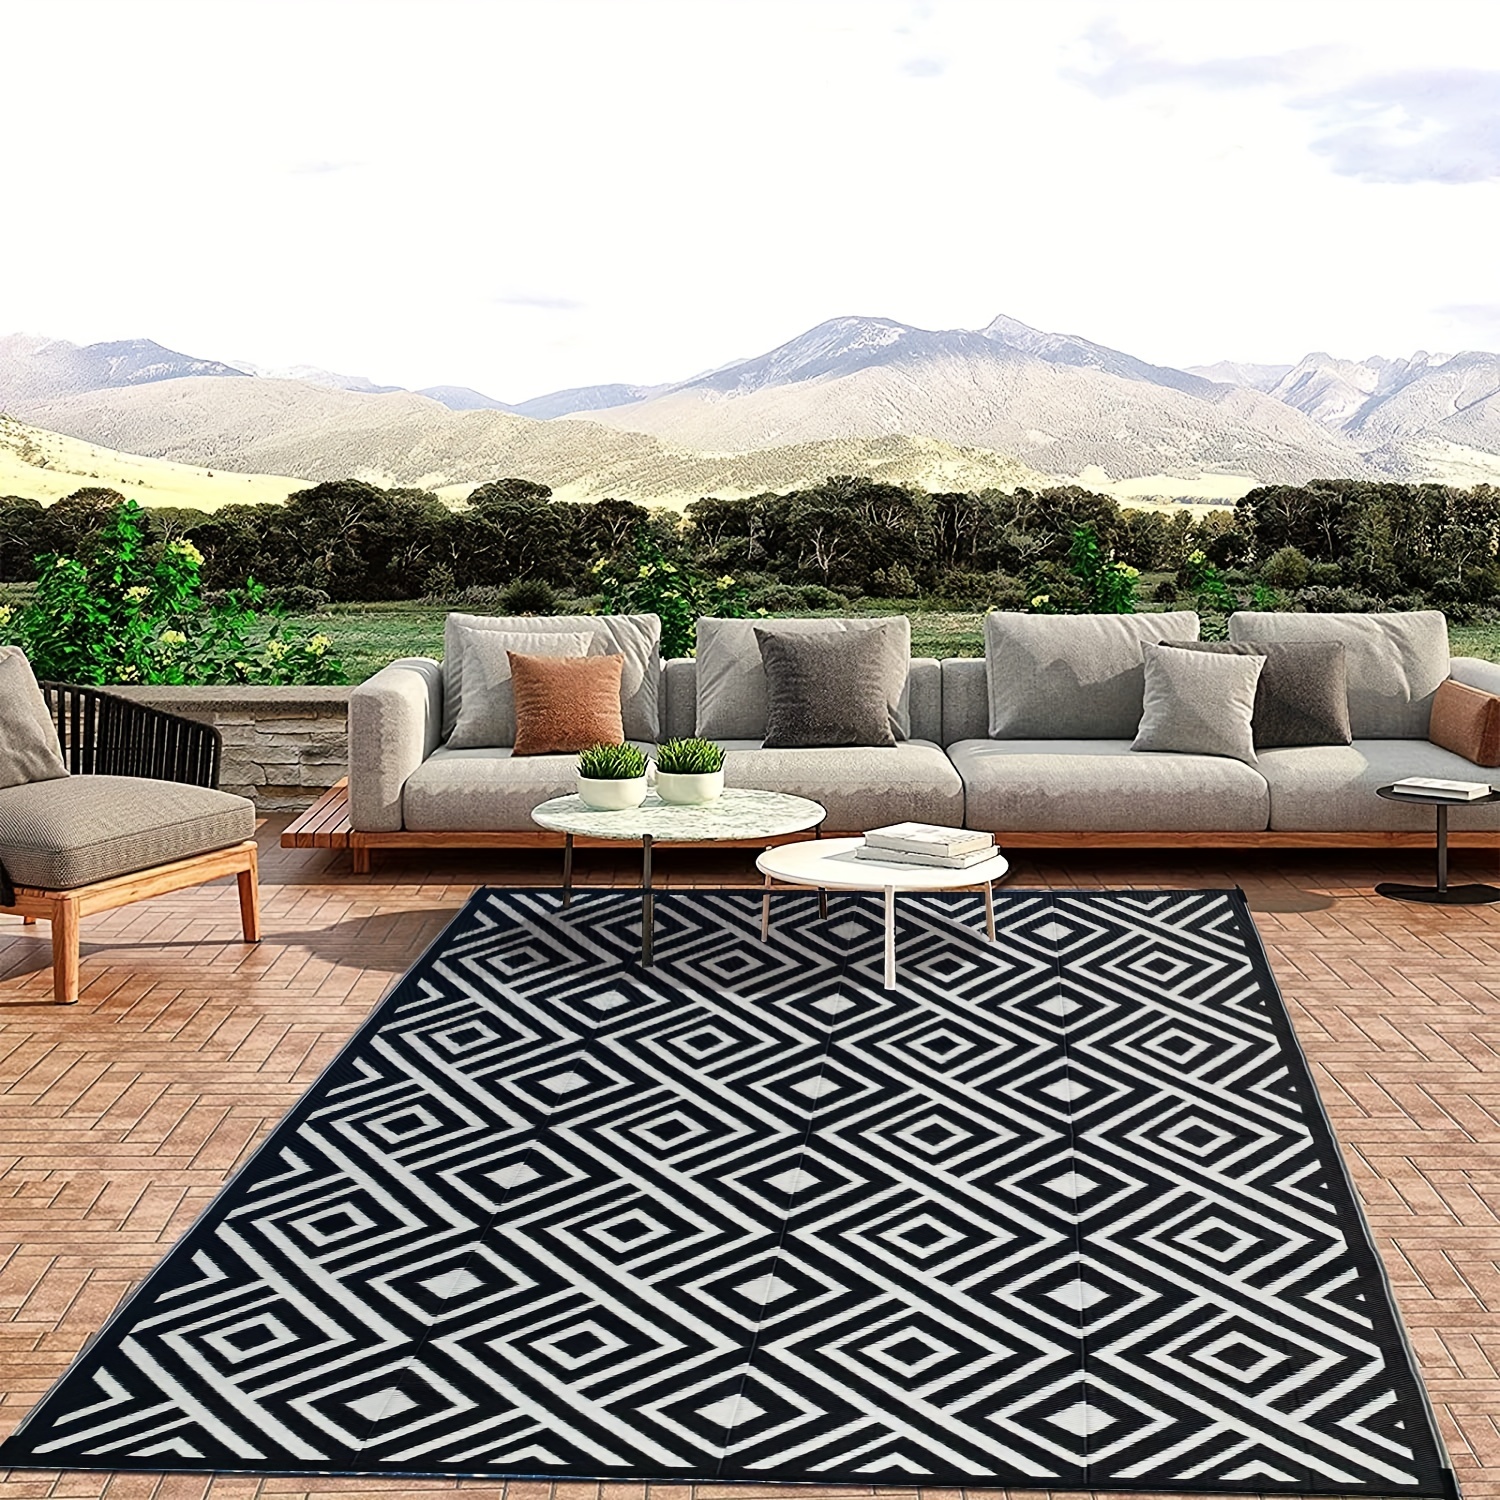 Mountain Mat  Stylish outdoor mats, recycled, waterproof, durable